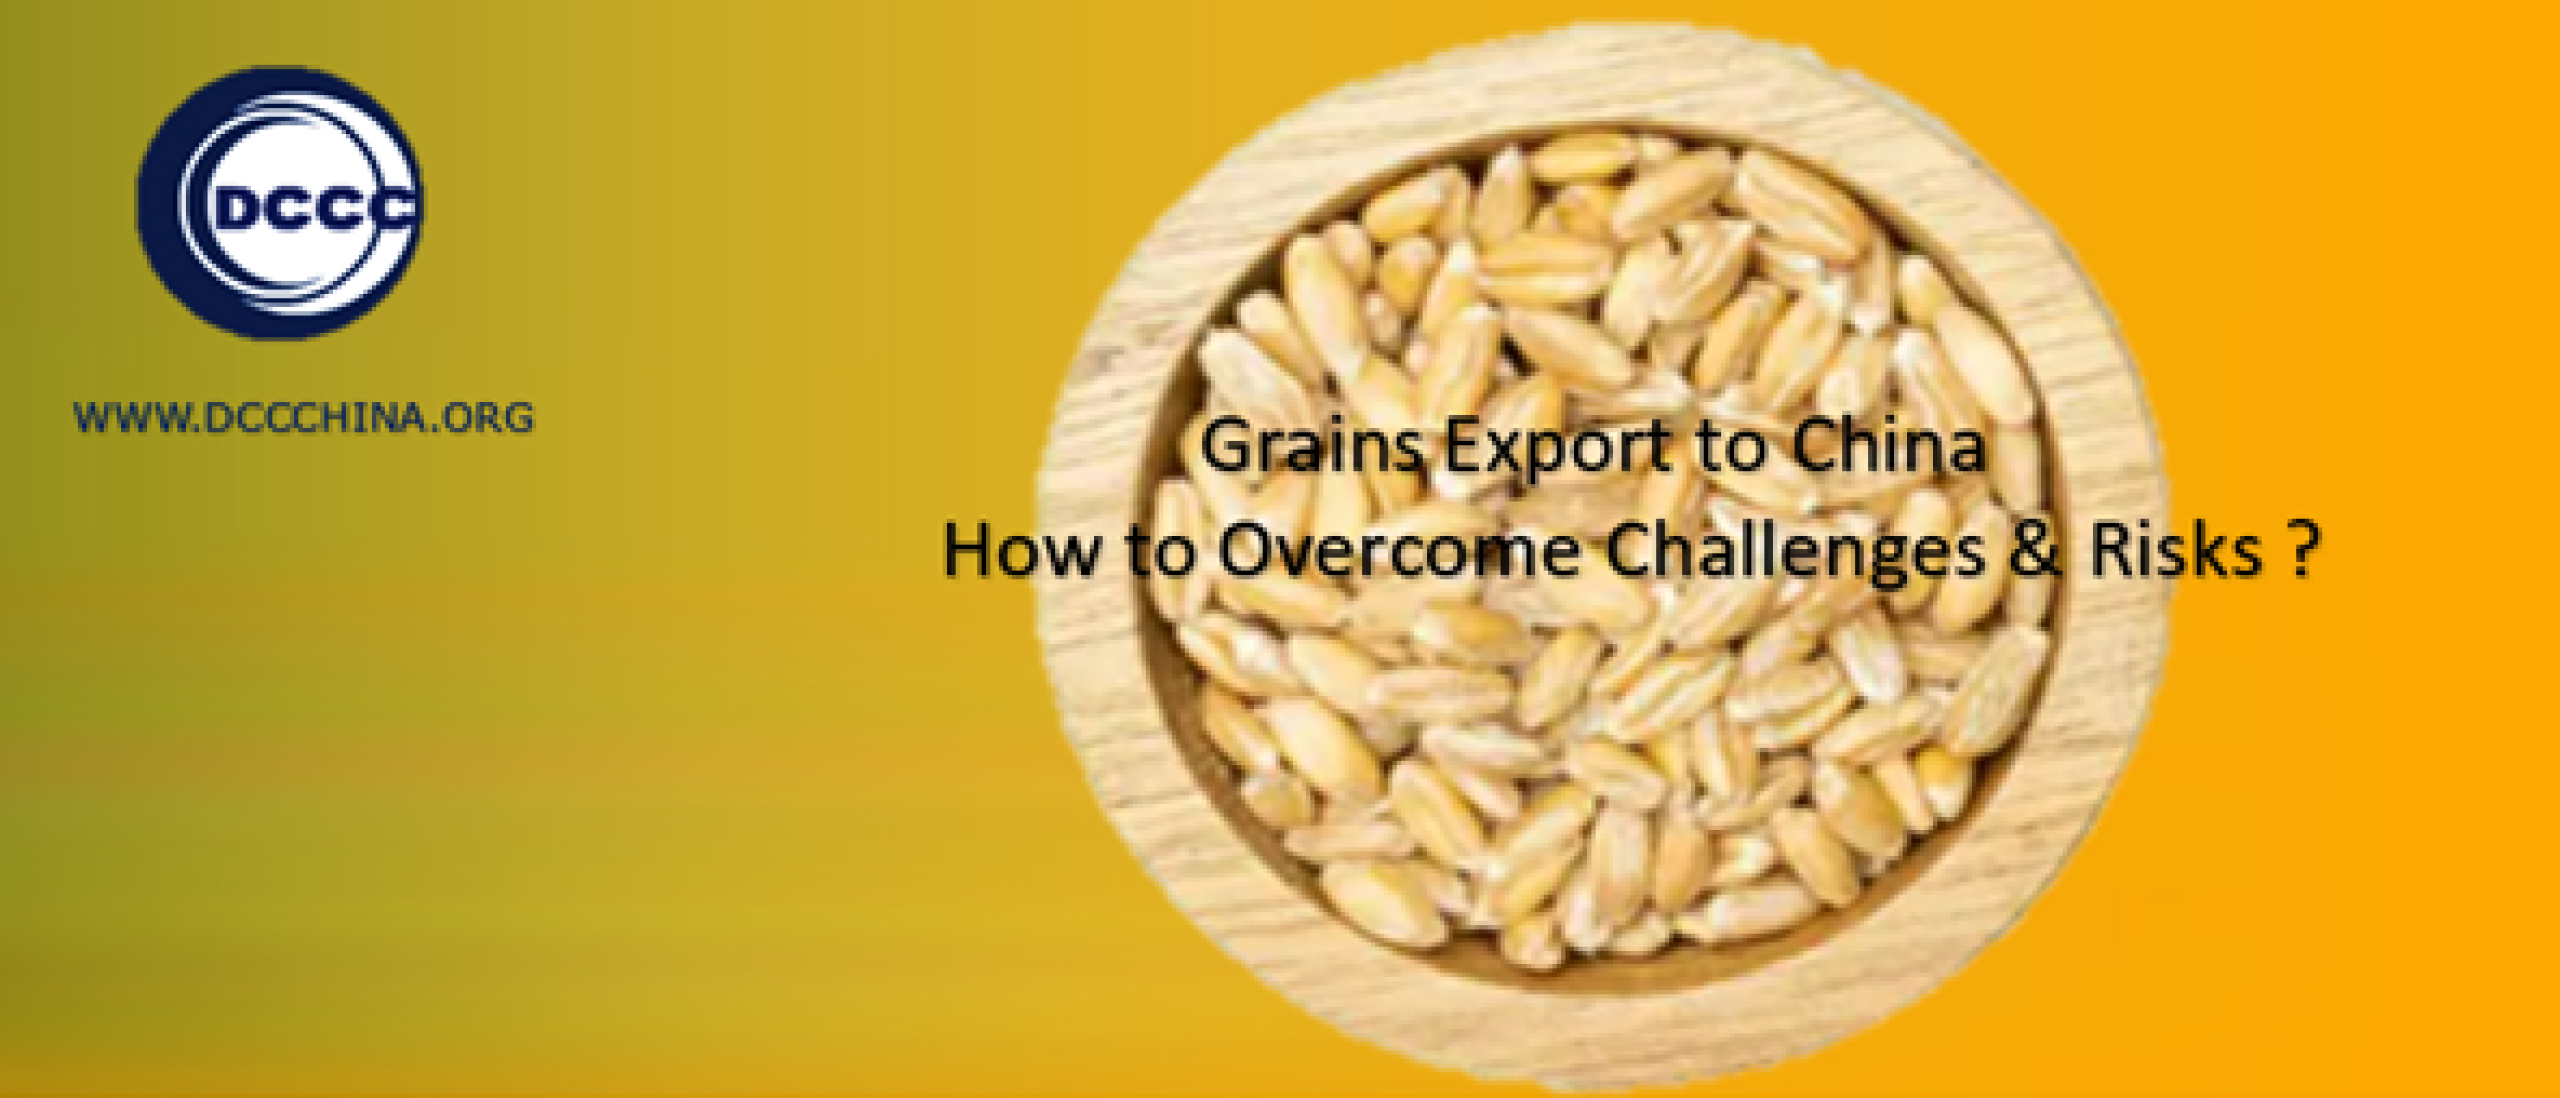 How to overcome challenges and risks grains export to China ?